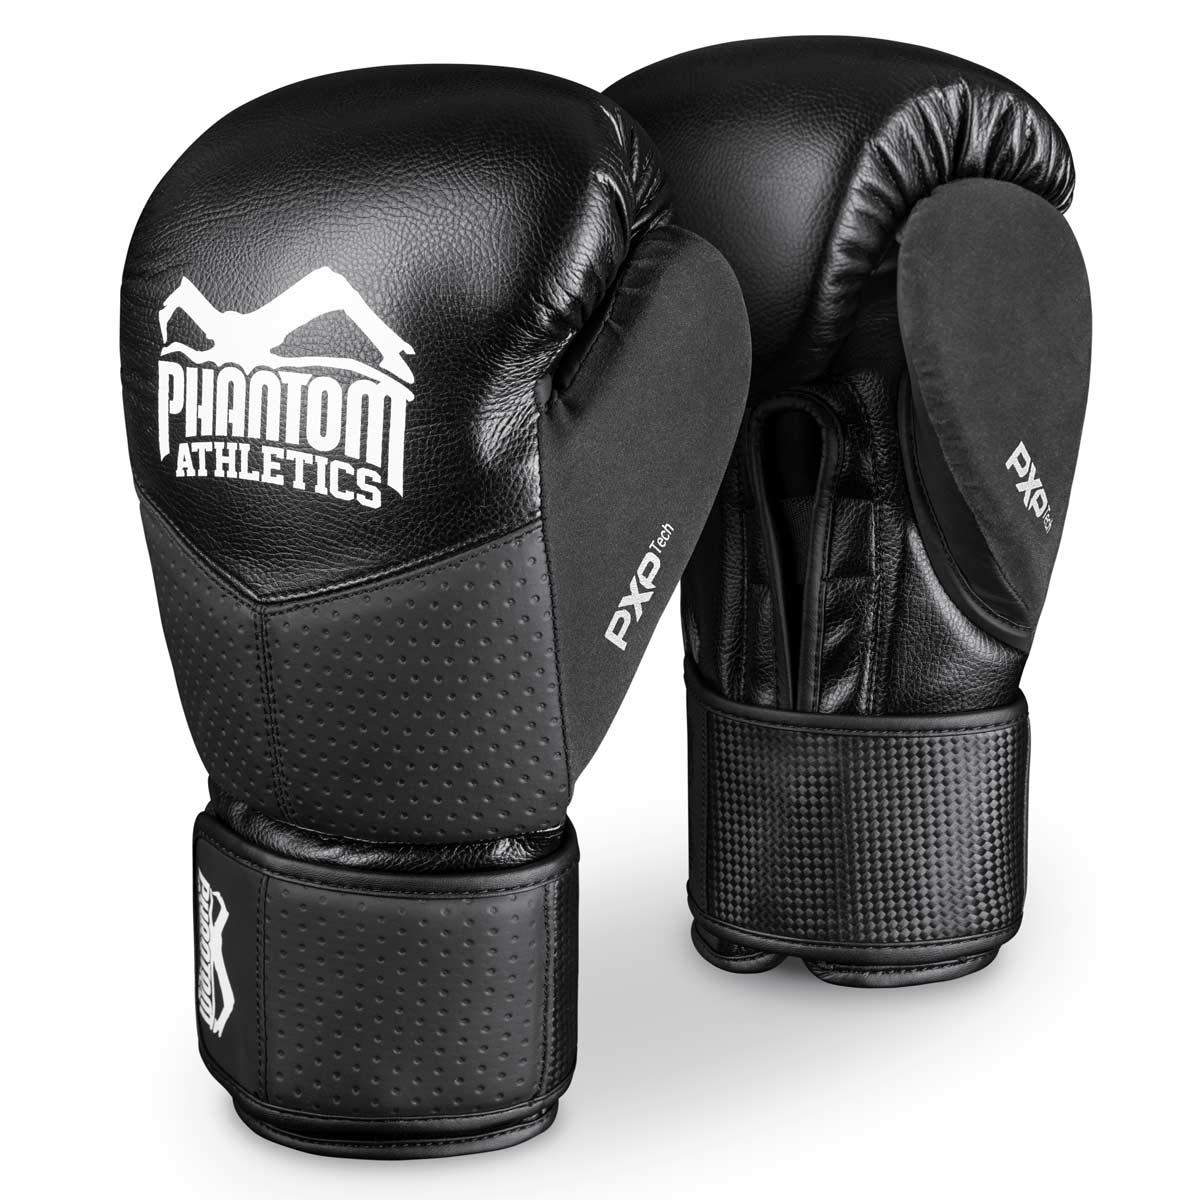 Beast Gear Hand Wraps for Boxing Gloves, Combat Sports, MMA, & Martial Arts